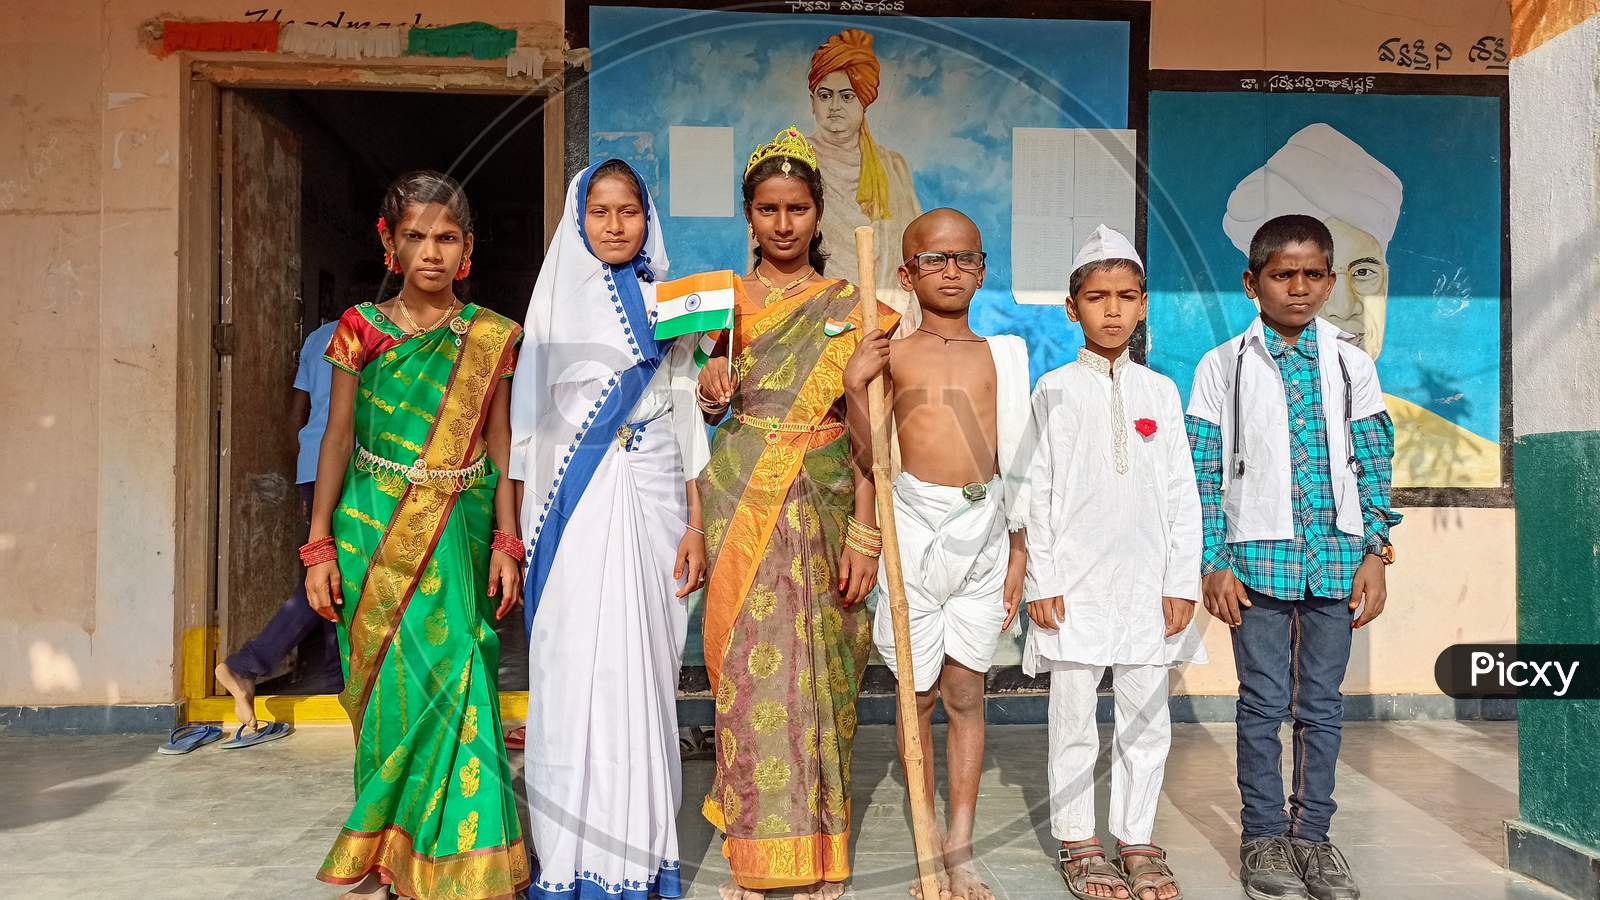 Indian School Children in Indian national Leaders Getup During  Republic Day celebrations  in Government Schools